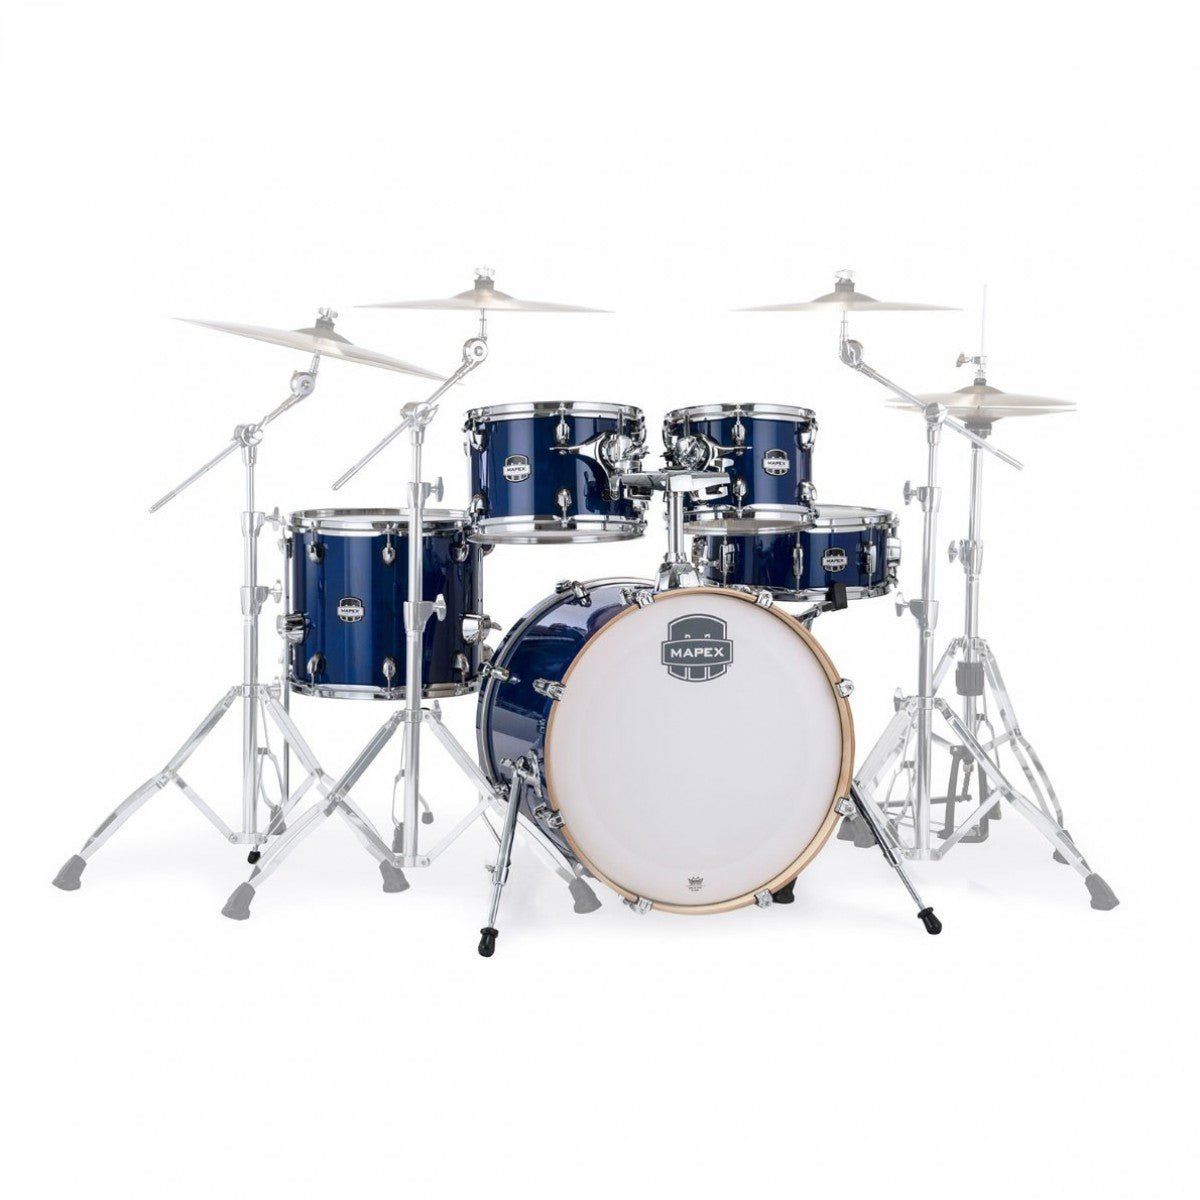 Shop Mapex Drum Kits At Into Music - Drum Store – Into Music Store